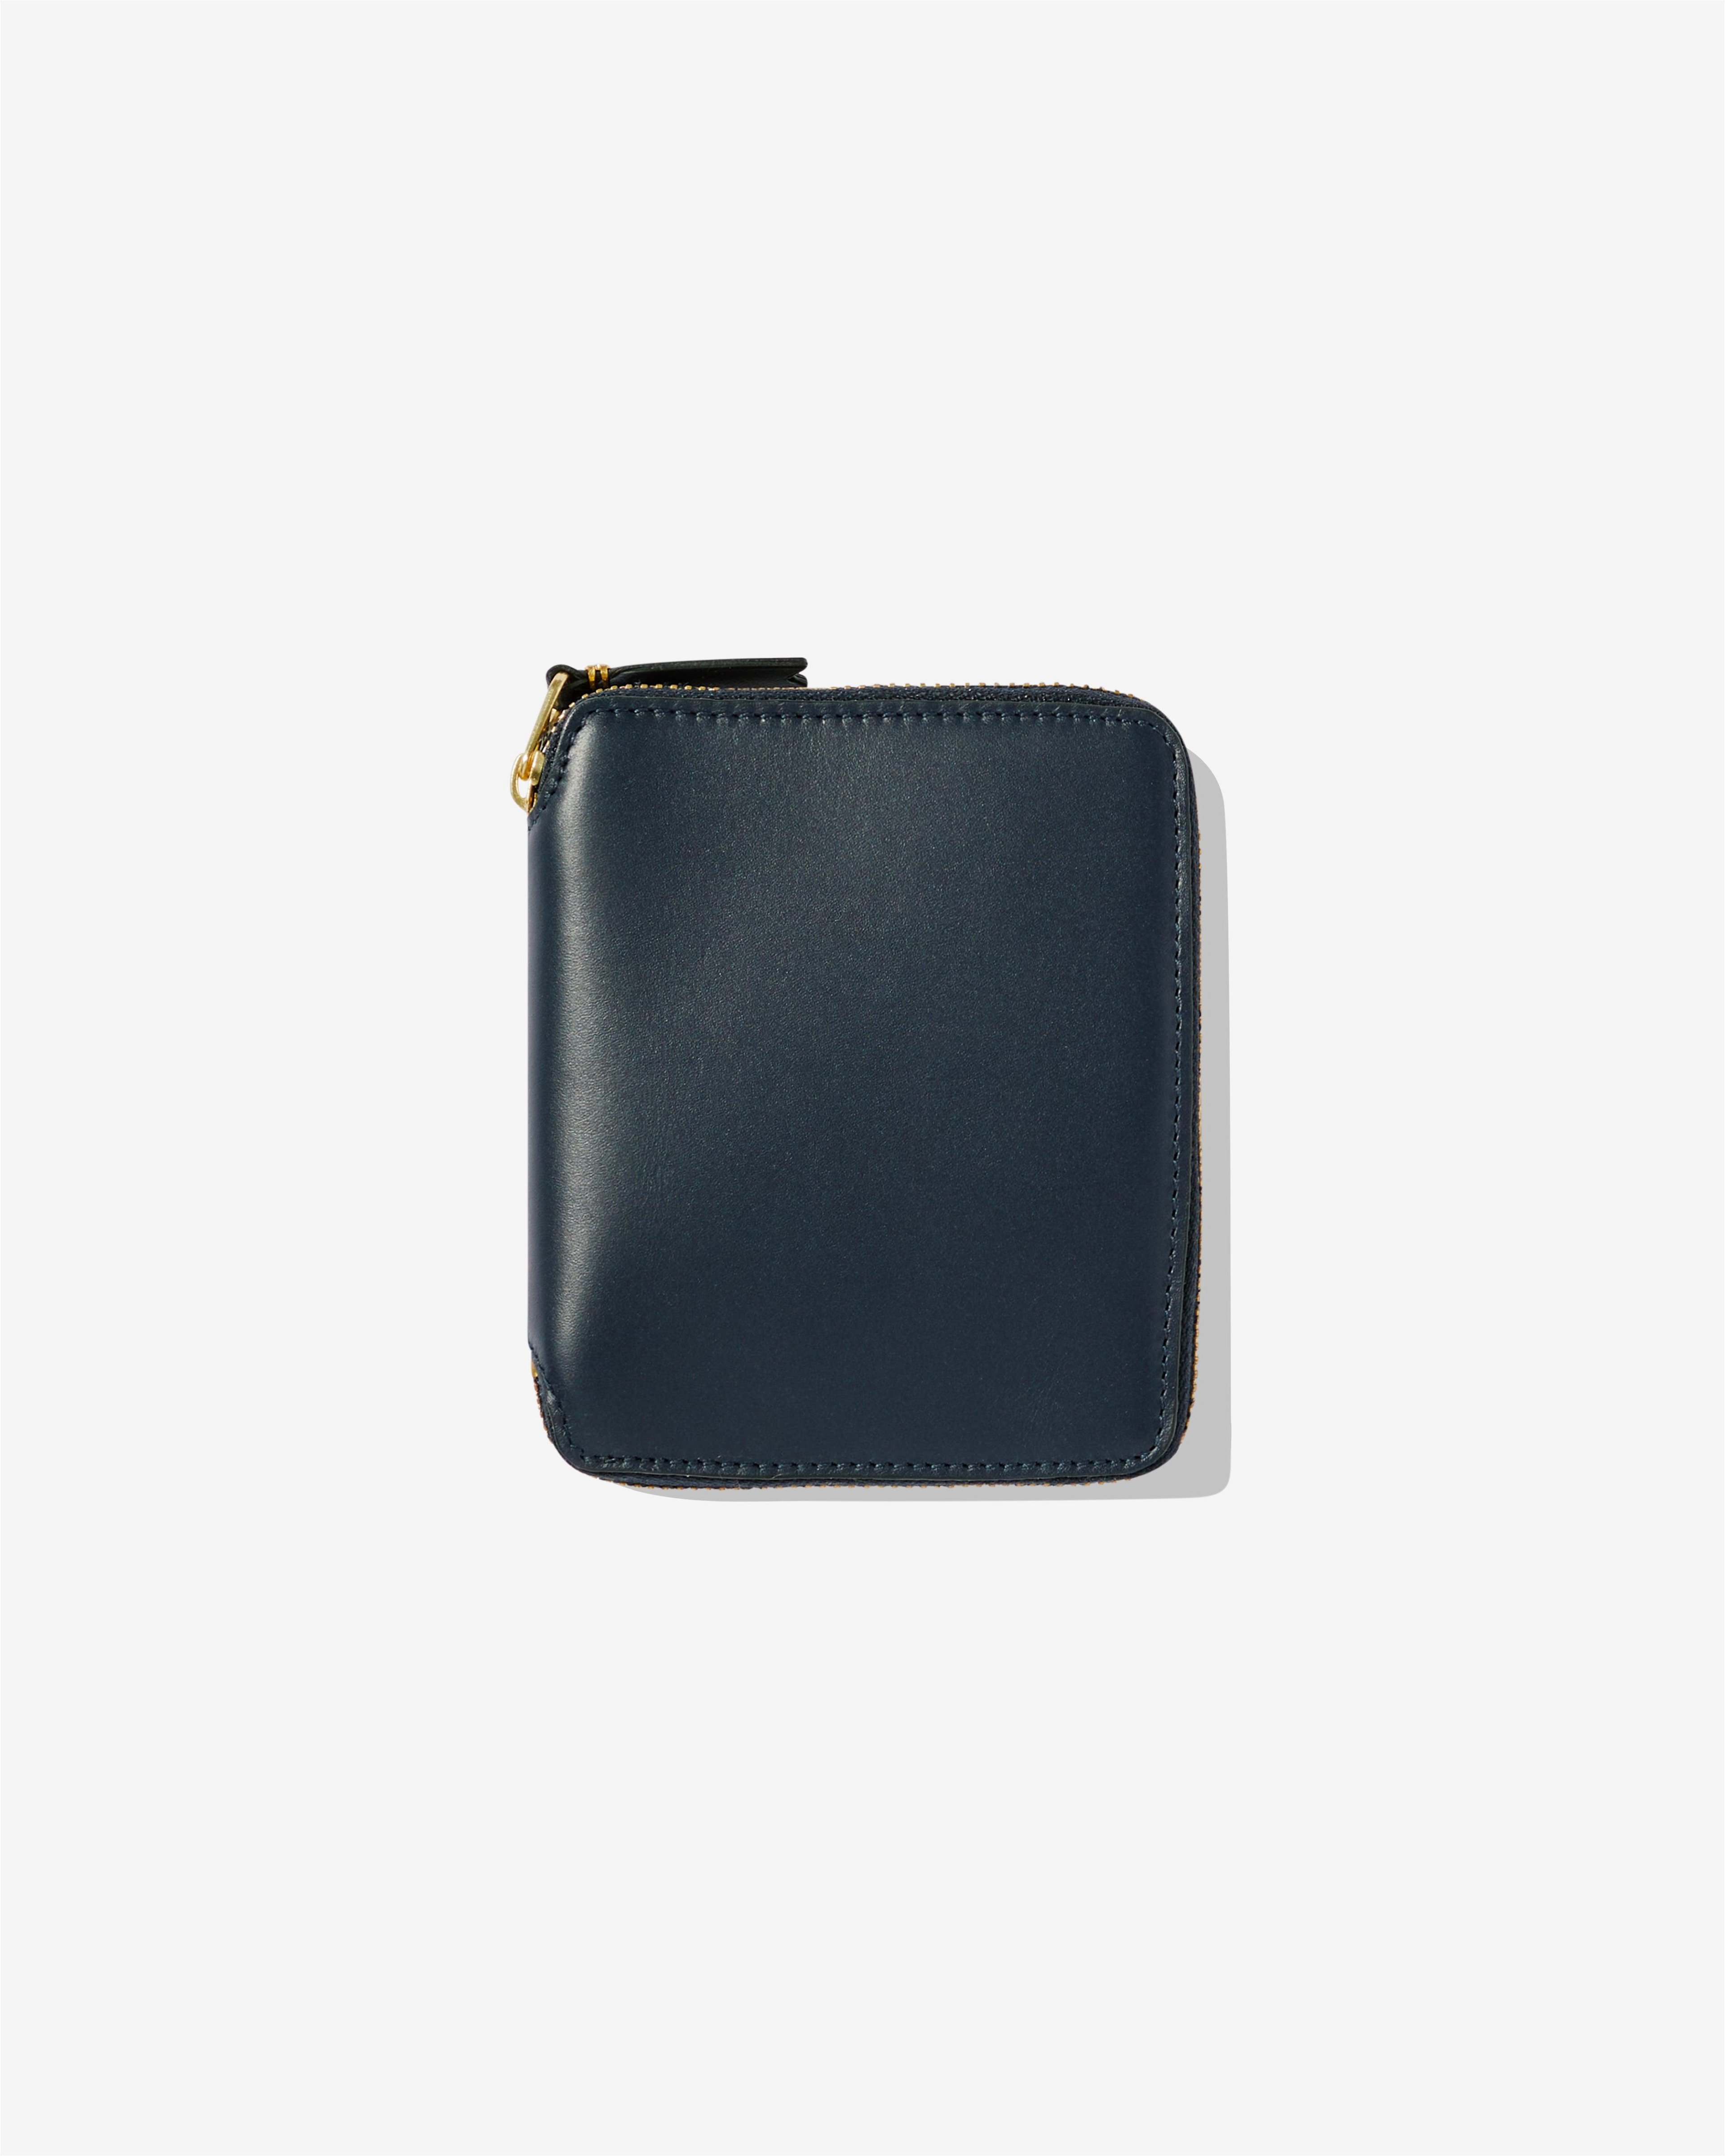 CDG Wallet - Classic Leather Full Zip Around Wallet - (Navy SA2100) by COMME DES GARCONS